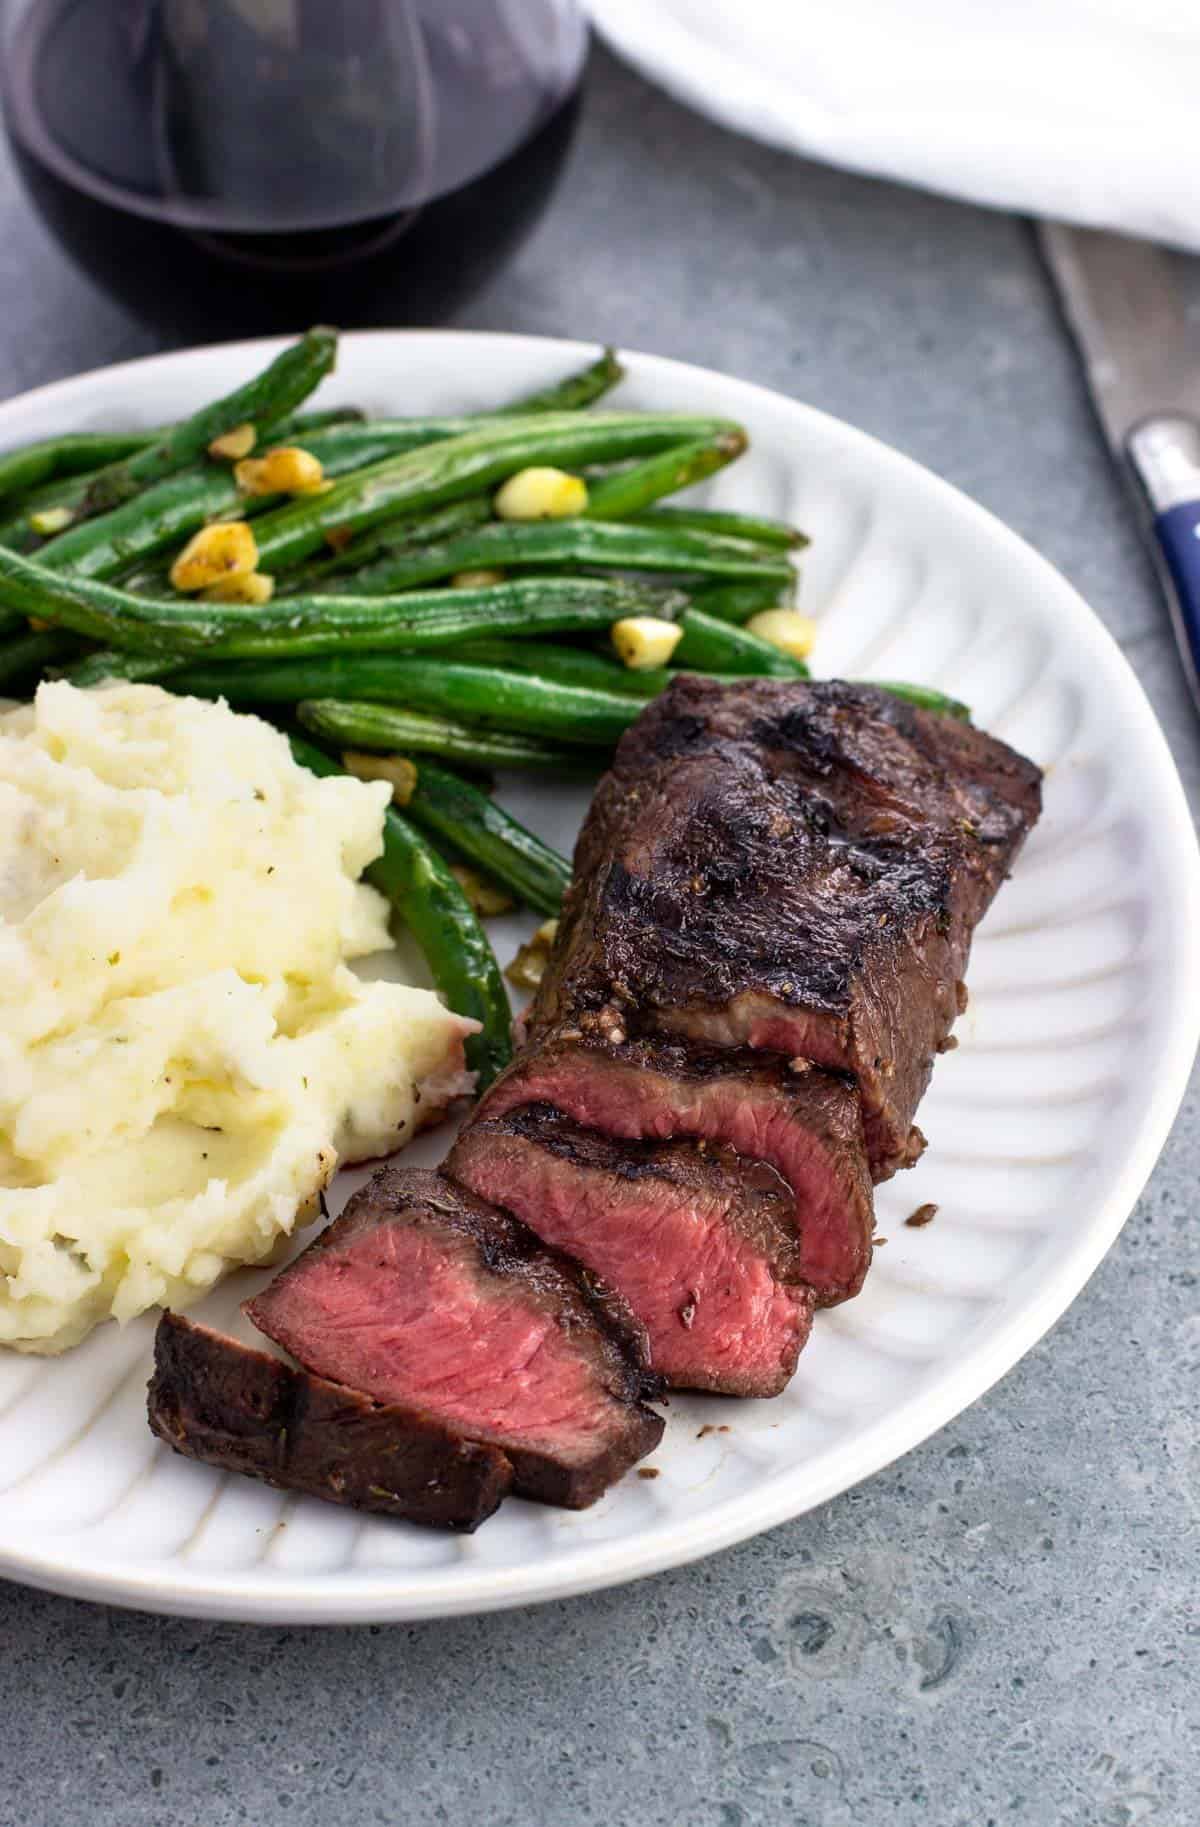 A dinner plate of steak, potatoes, and green beans.